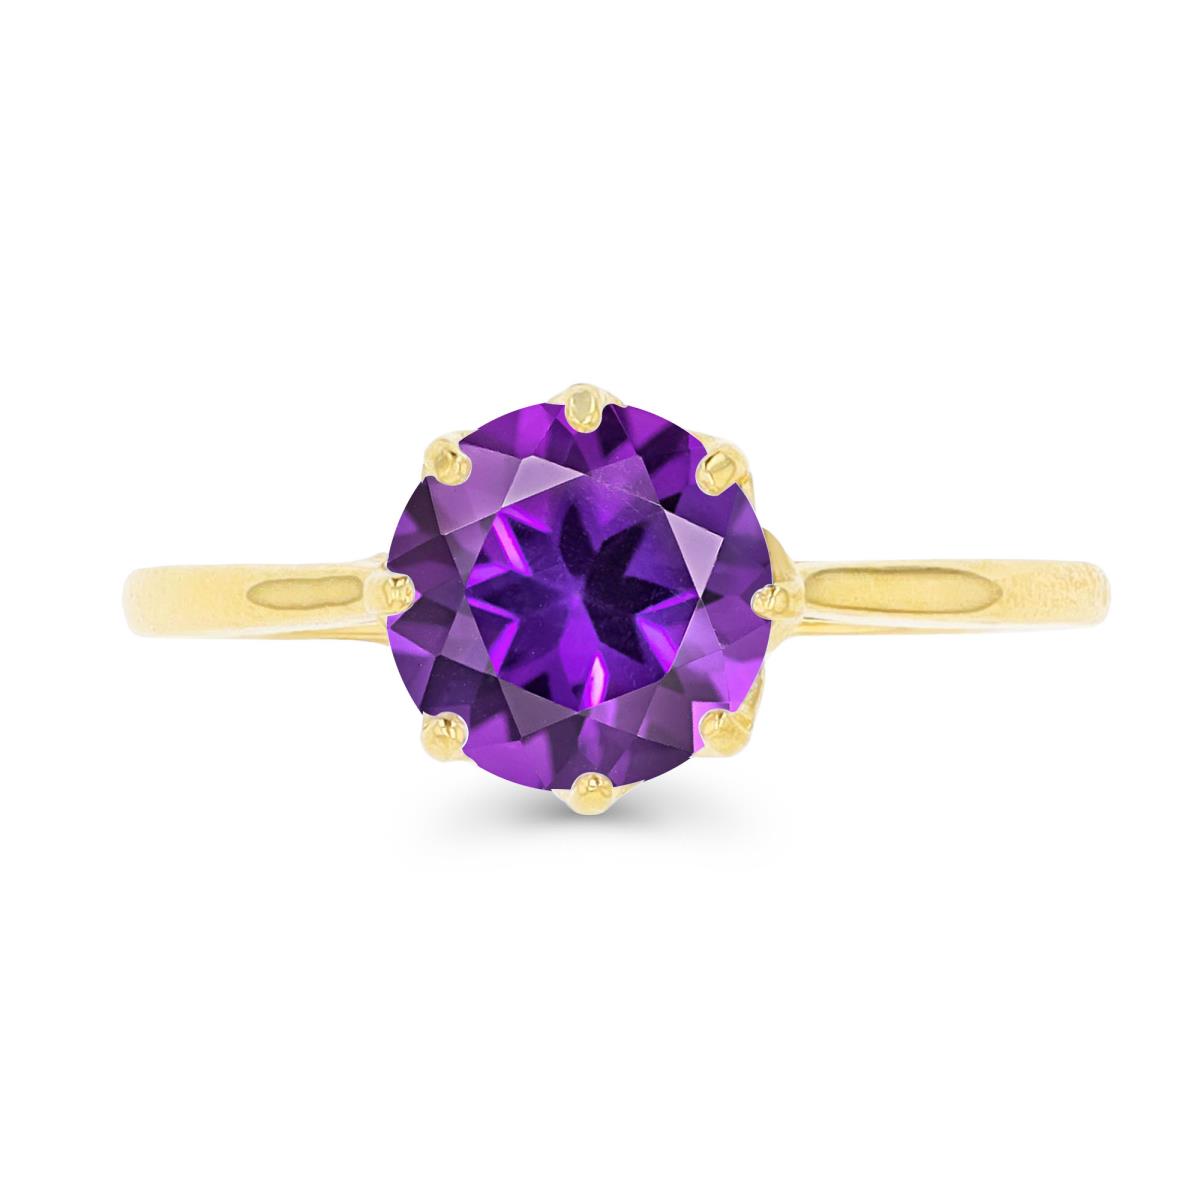 14K Yellow Gold 8mm Round Cut Amethyst CZ Solitaire Ring